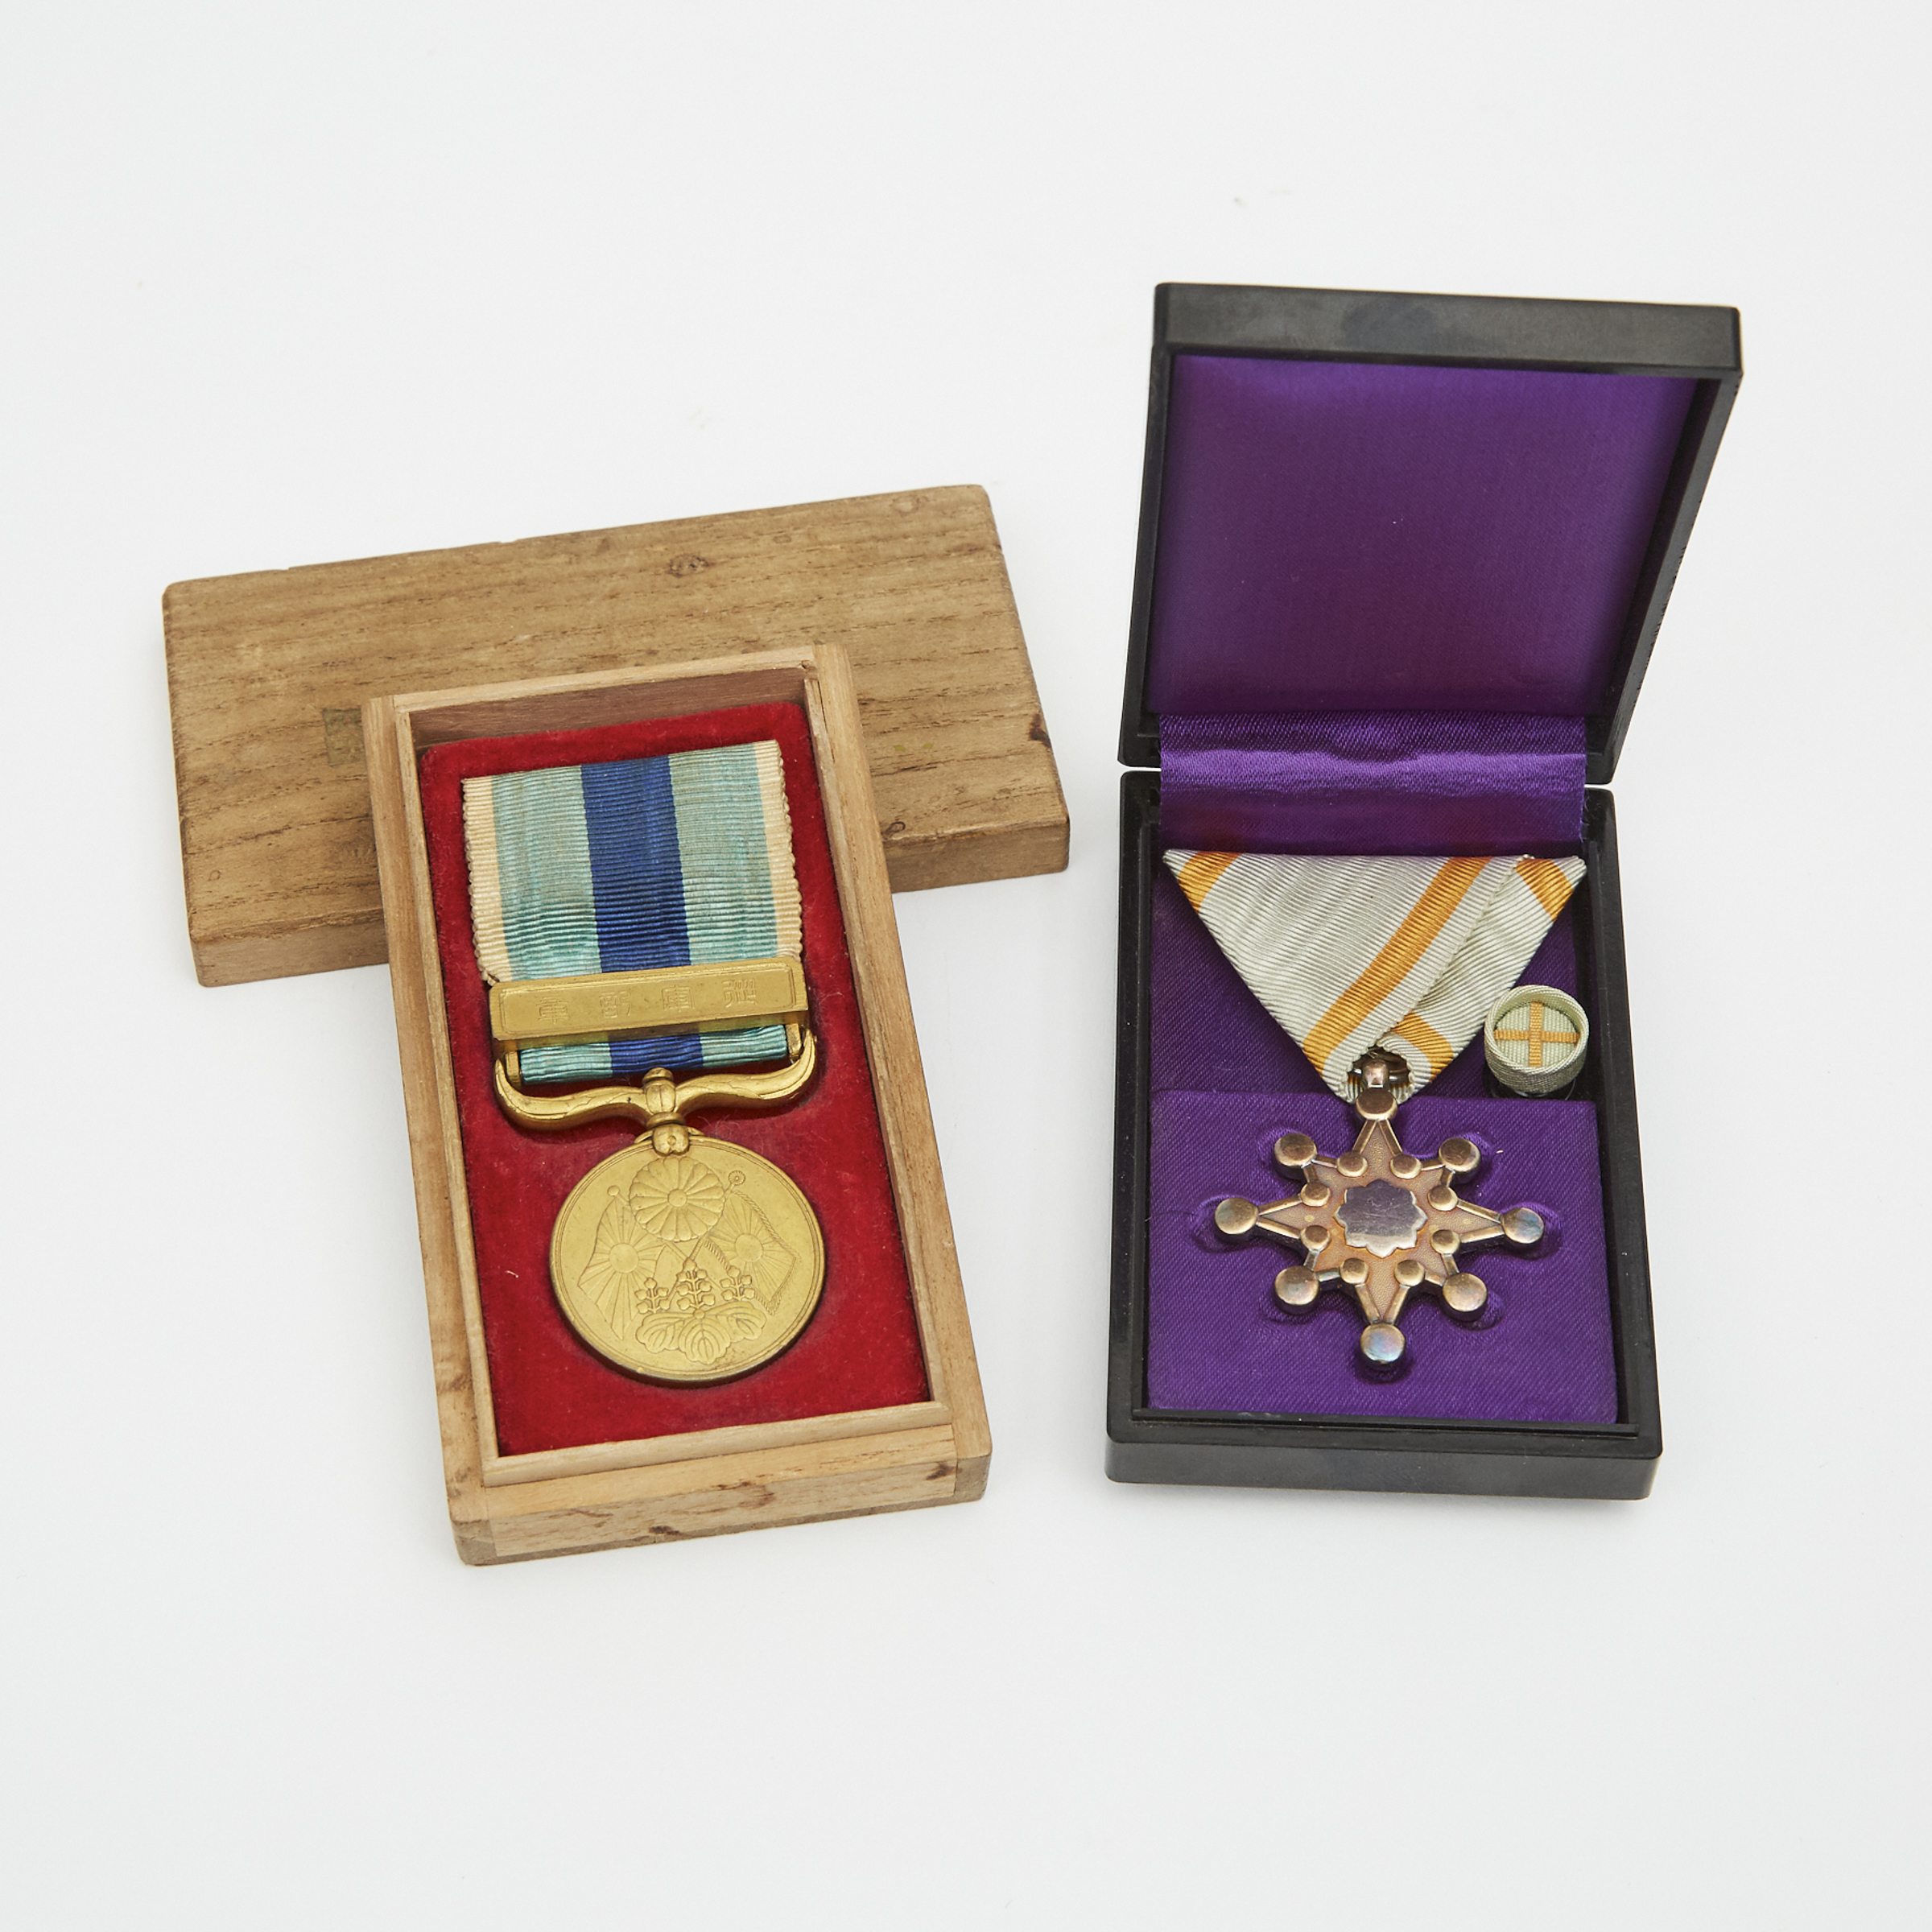 A Japanese Military Medal and an Order, Meiji Period